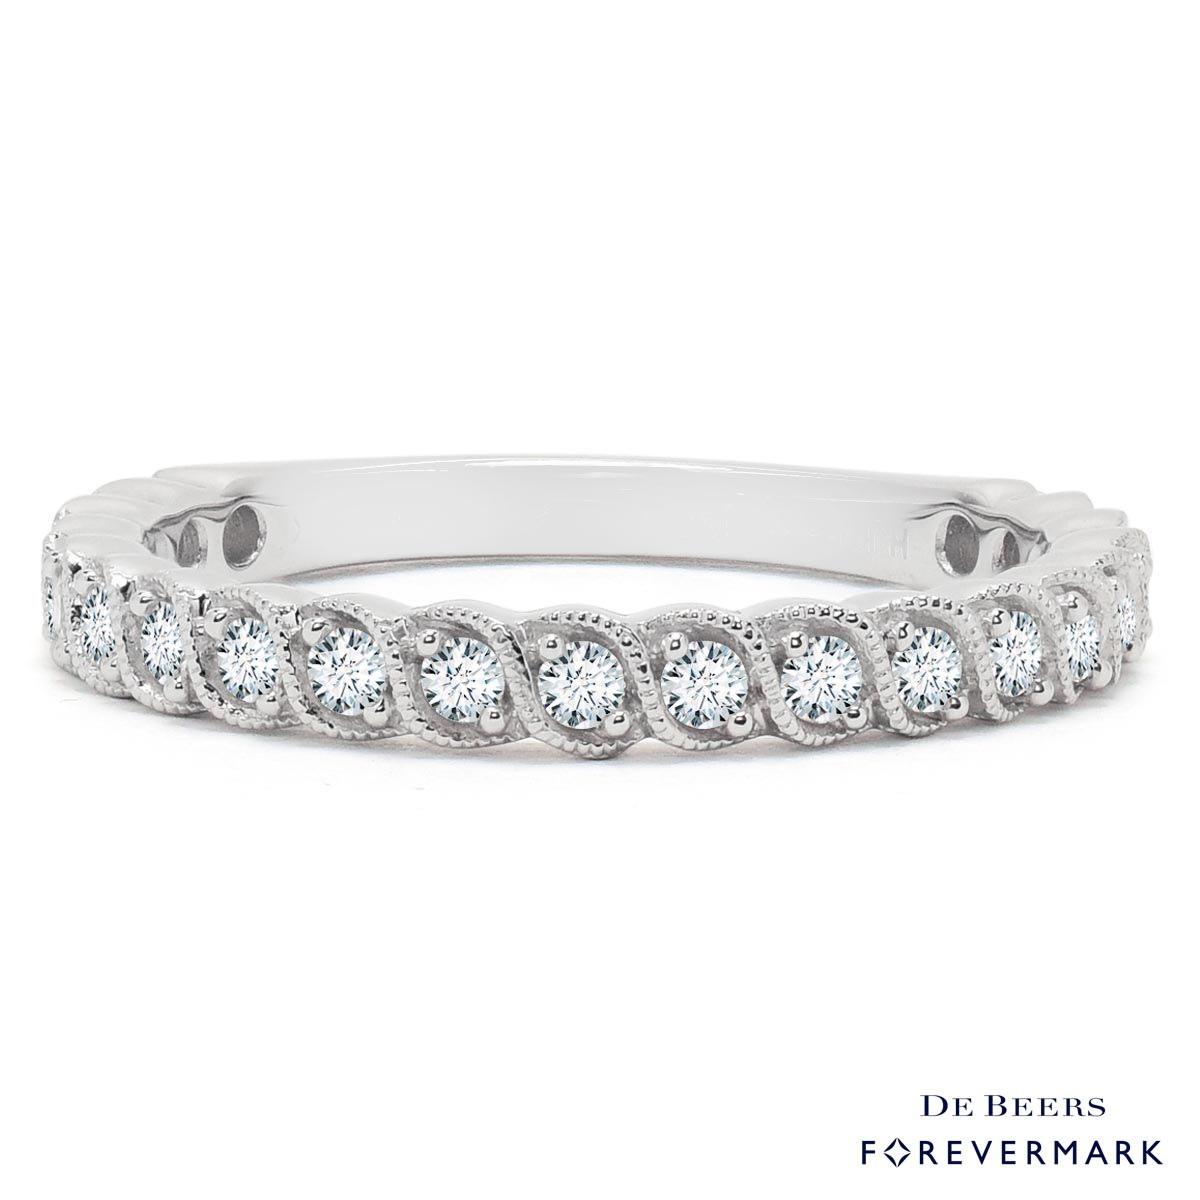 De Beers Forevermark Petite Diamond Band in 18kt White Gold (1/3ct tw)